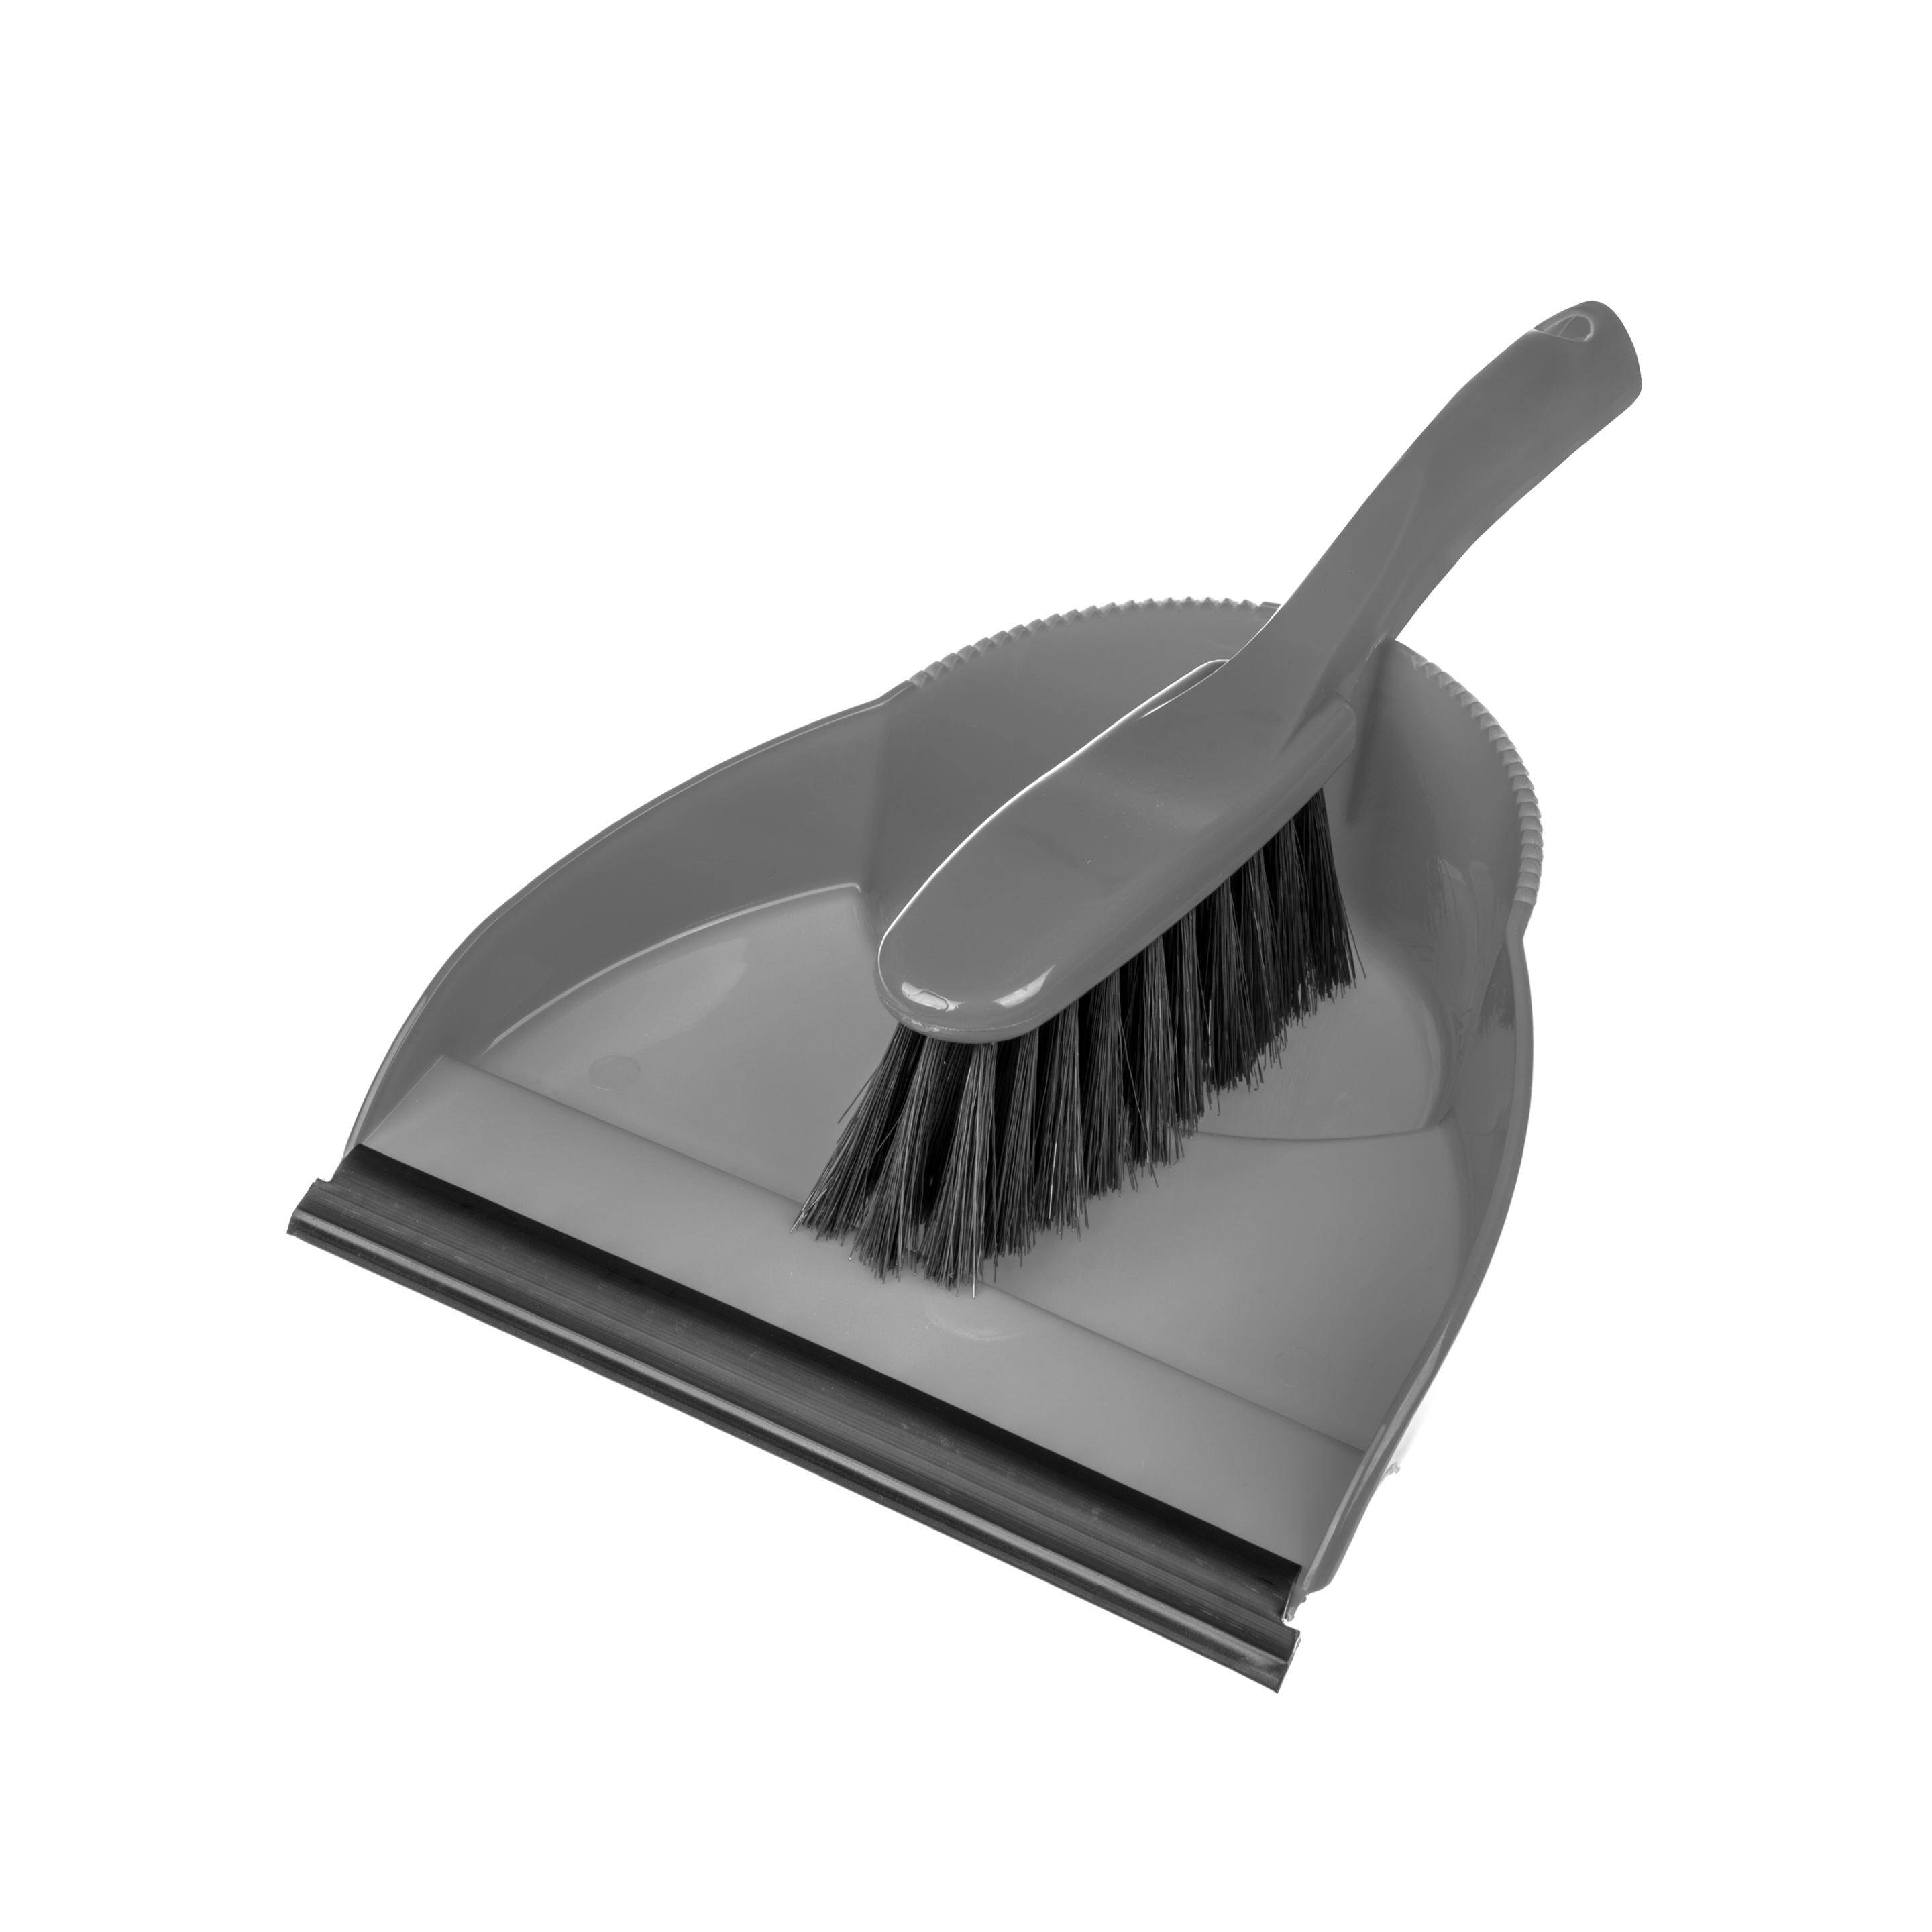 Dustpan and sweeper set